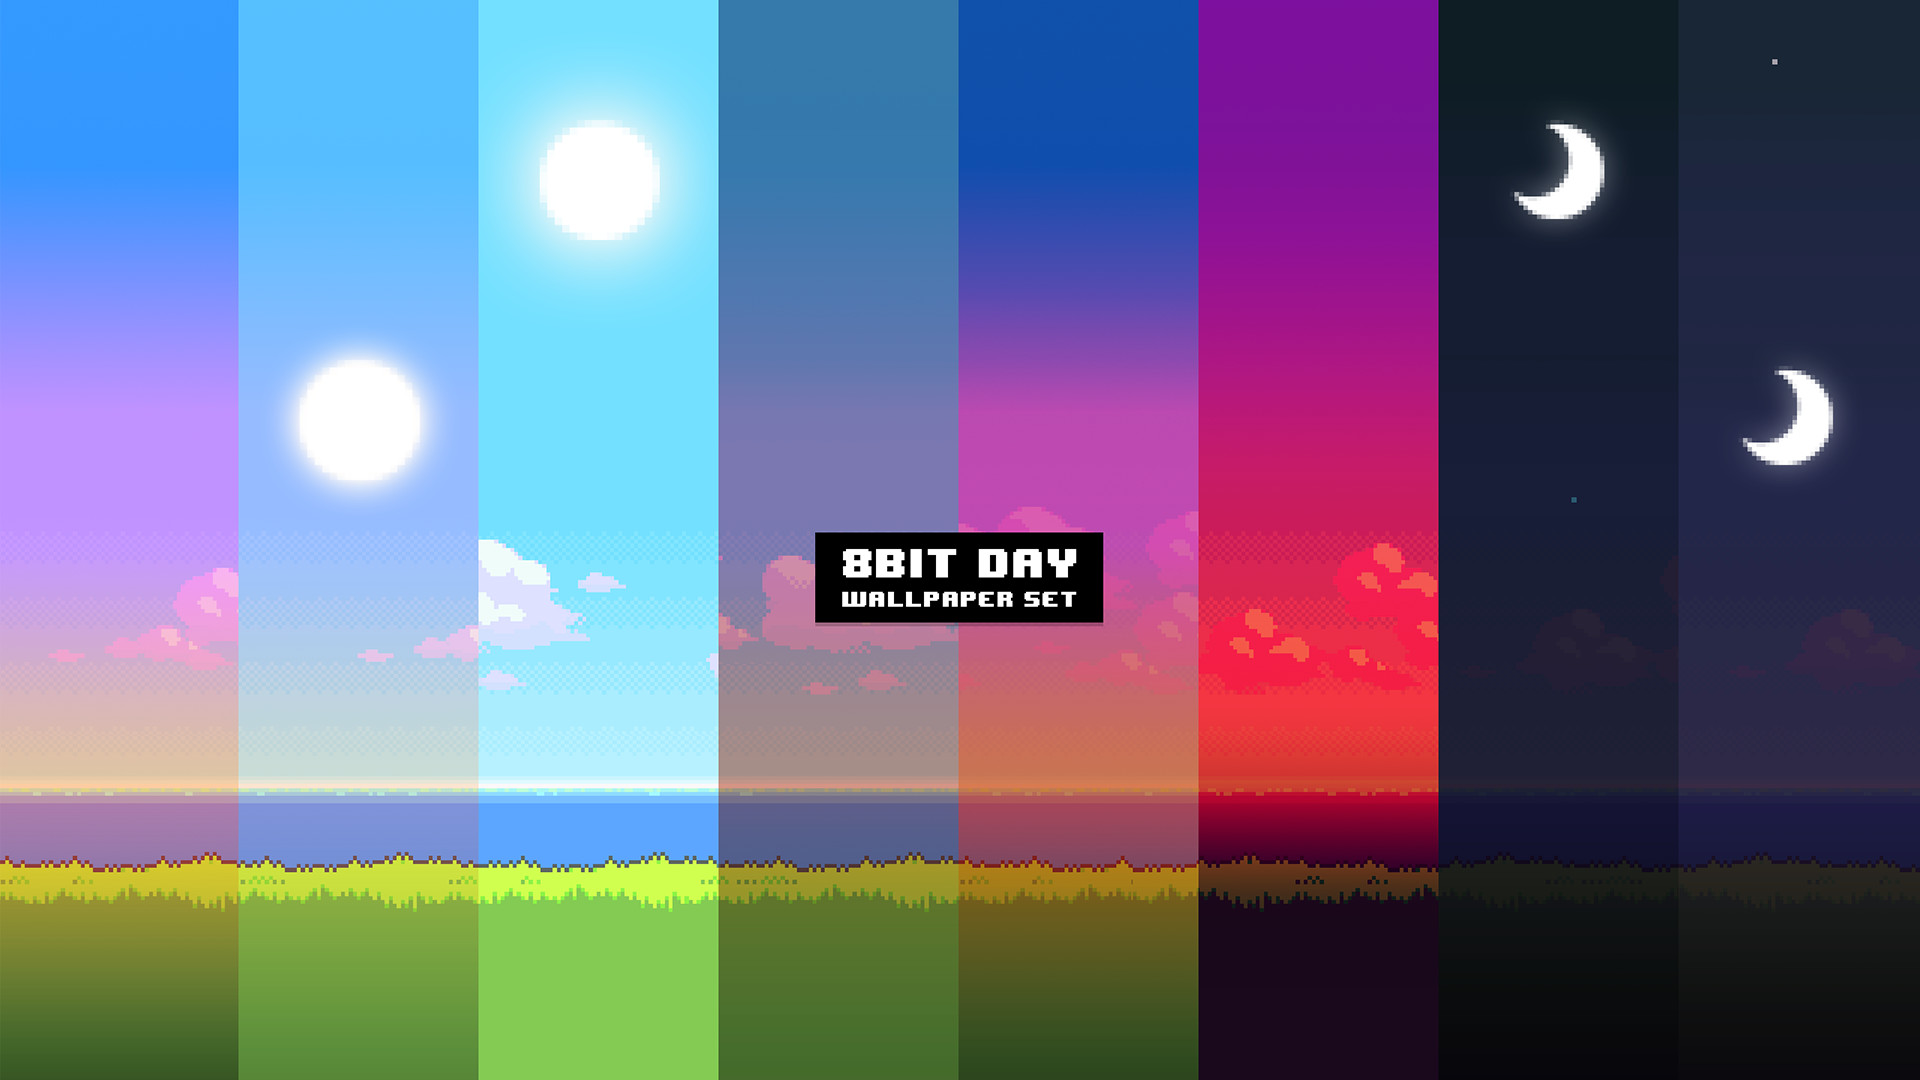 UPDATE New version of the 8Bit Day Wallpaper Set. Pixel wallpaper changes based on time of day Download different resolutions and installation